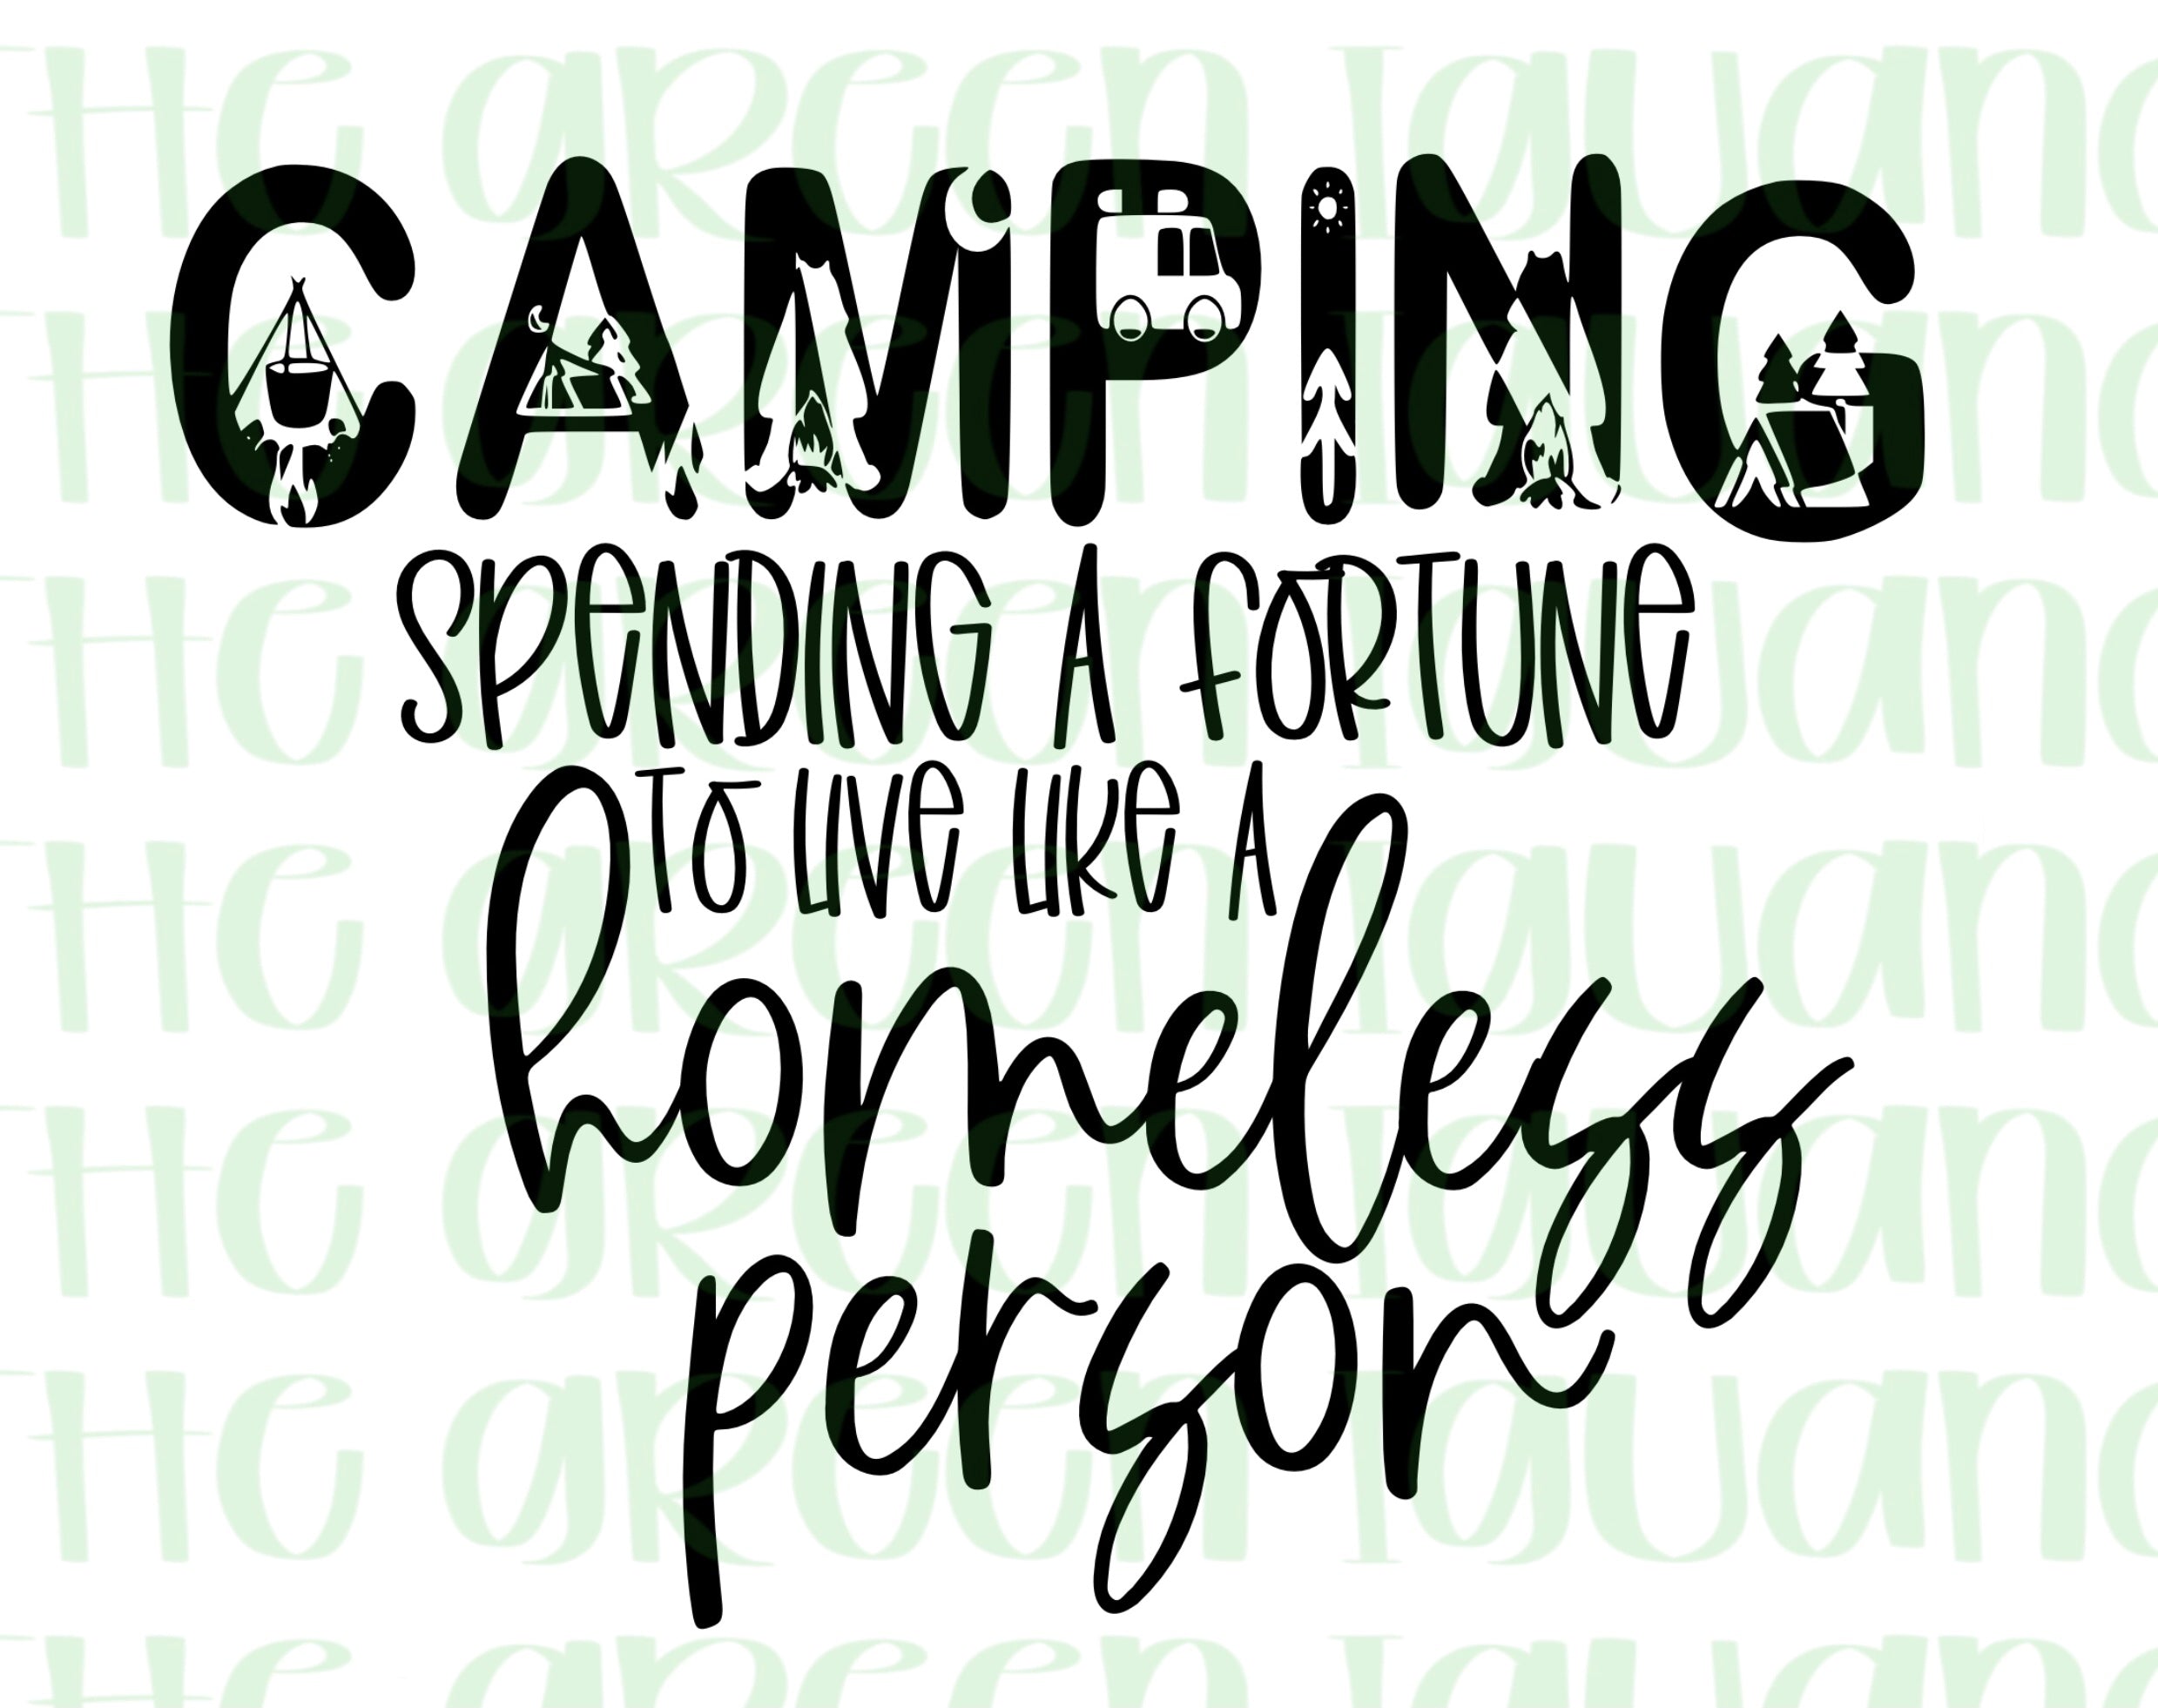 Camping. Spending a fortune to live like a homeless person - DIGITAL